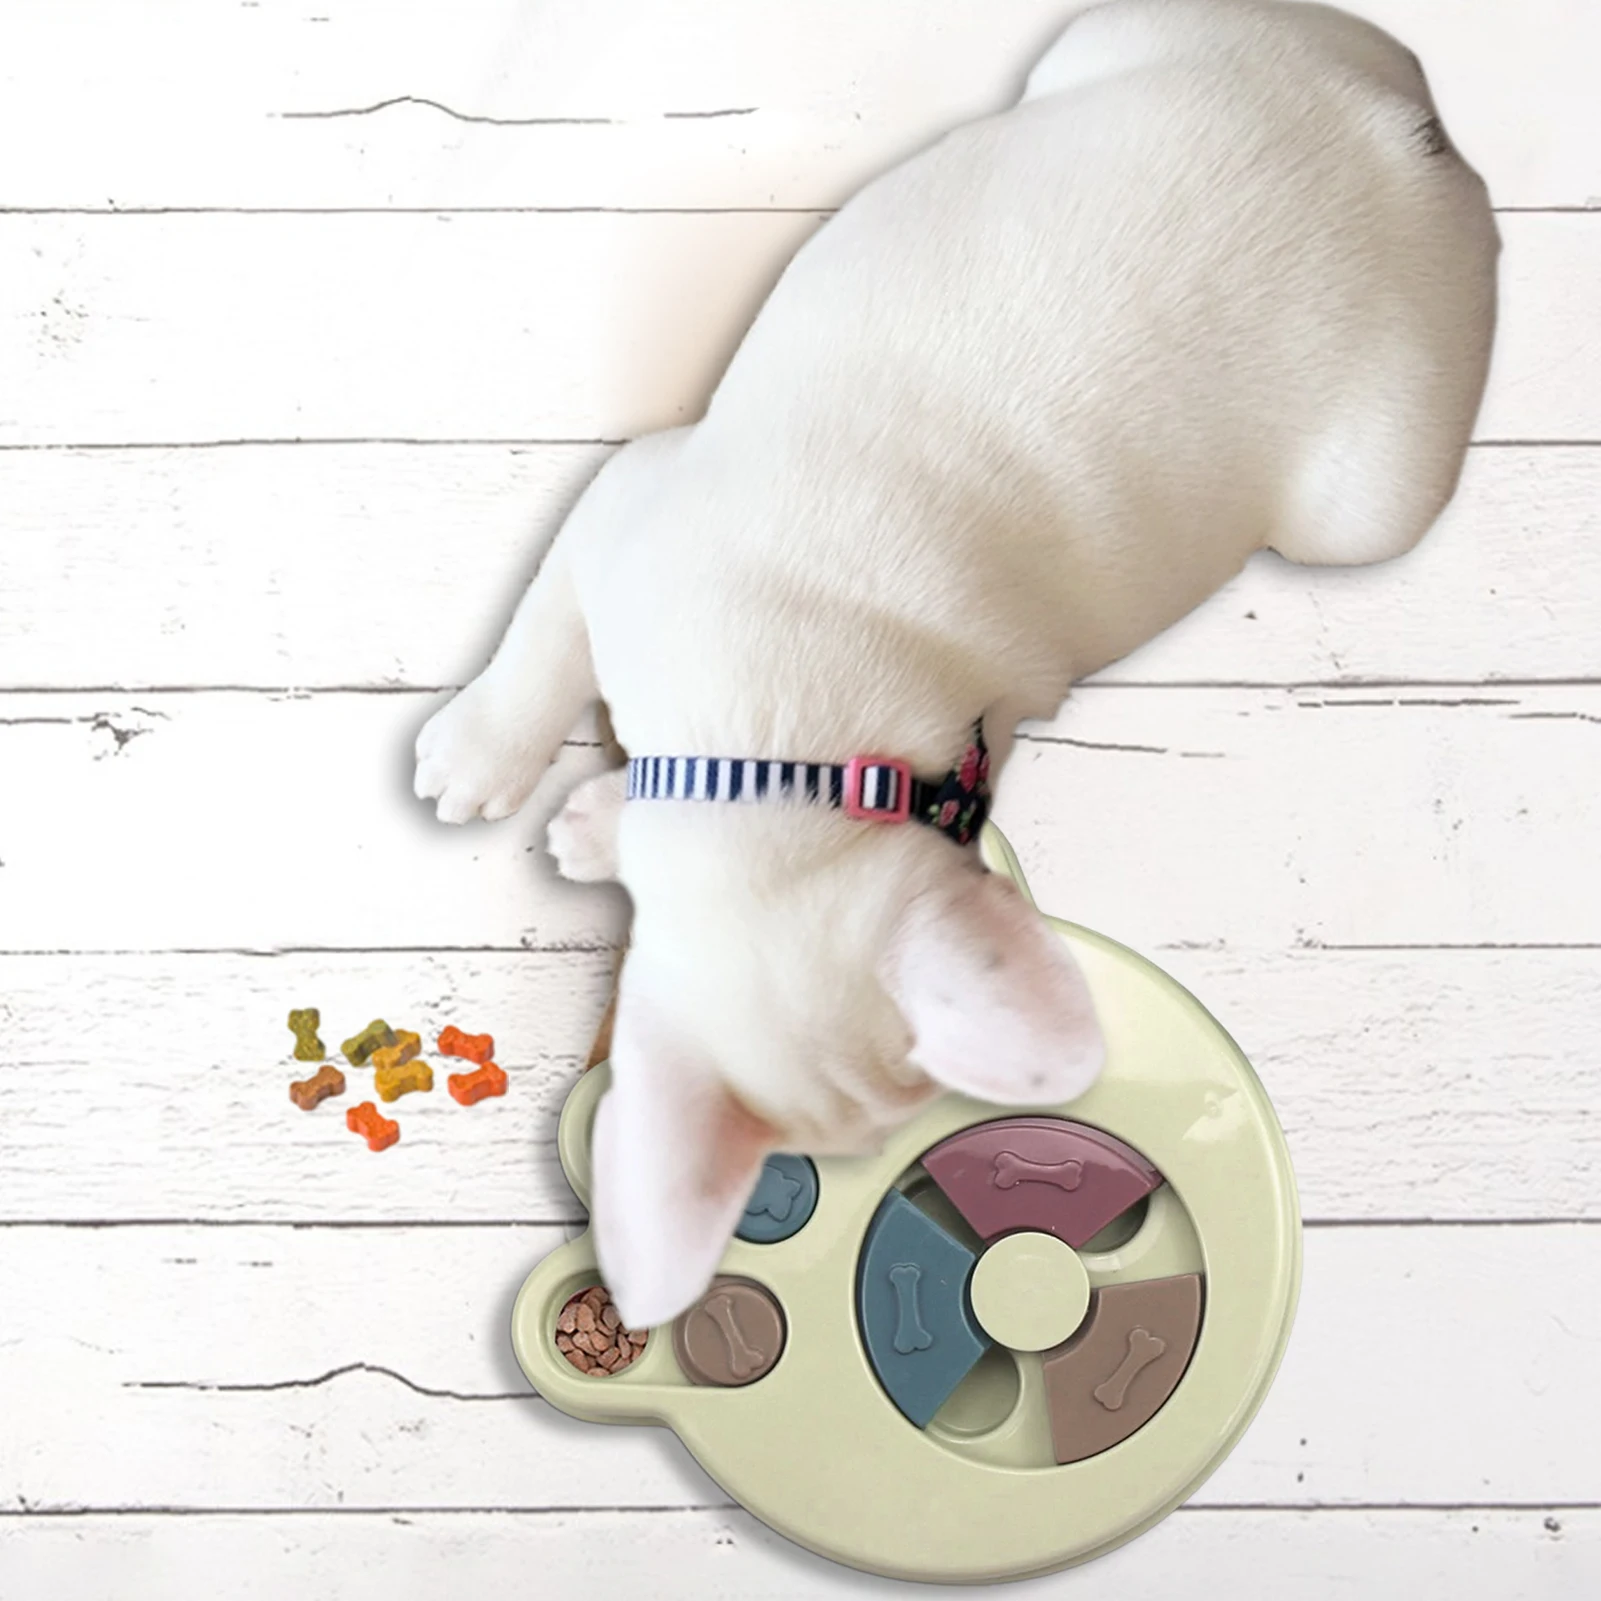 https://ae01.alicdn.com/kf/Sd3e60c52764642d1bd2161df41eb9c03l/Dog-Puzzles-For-Smart-Dogs-Interactive-Dog-Puzzle-Toys-Puppy-Food-Puzzle-Feeder-Toys-Dog-Treat.jpg